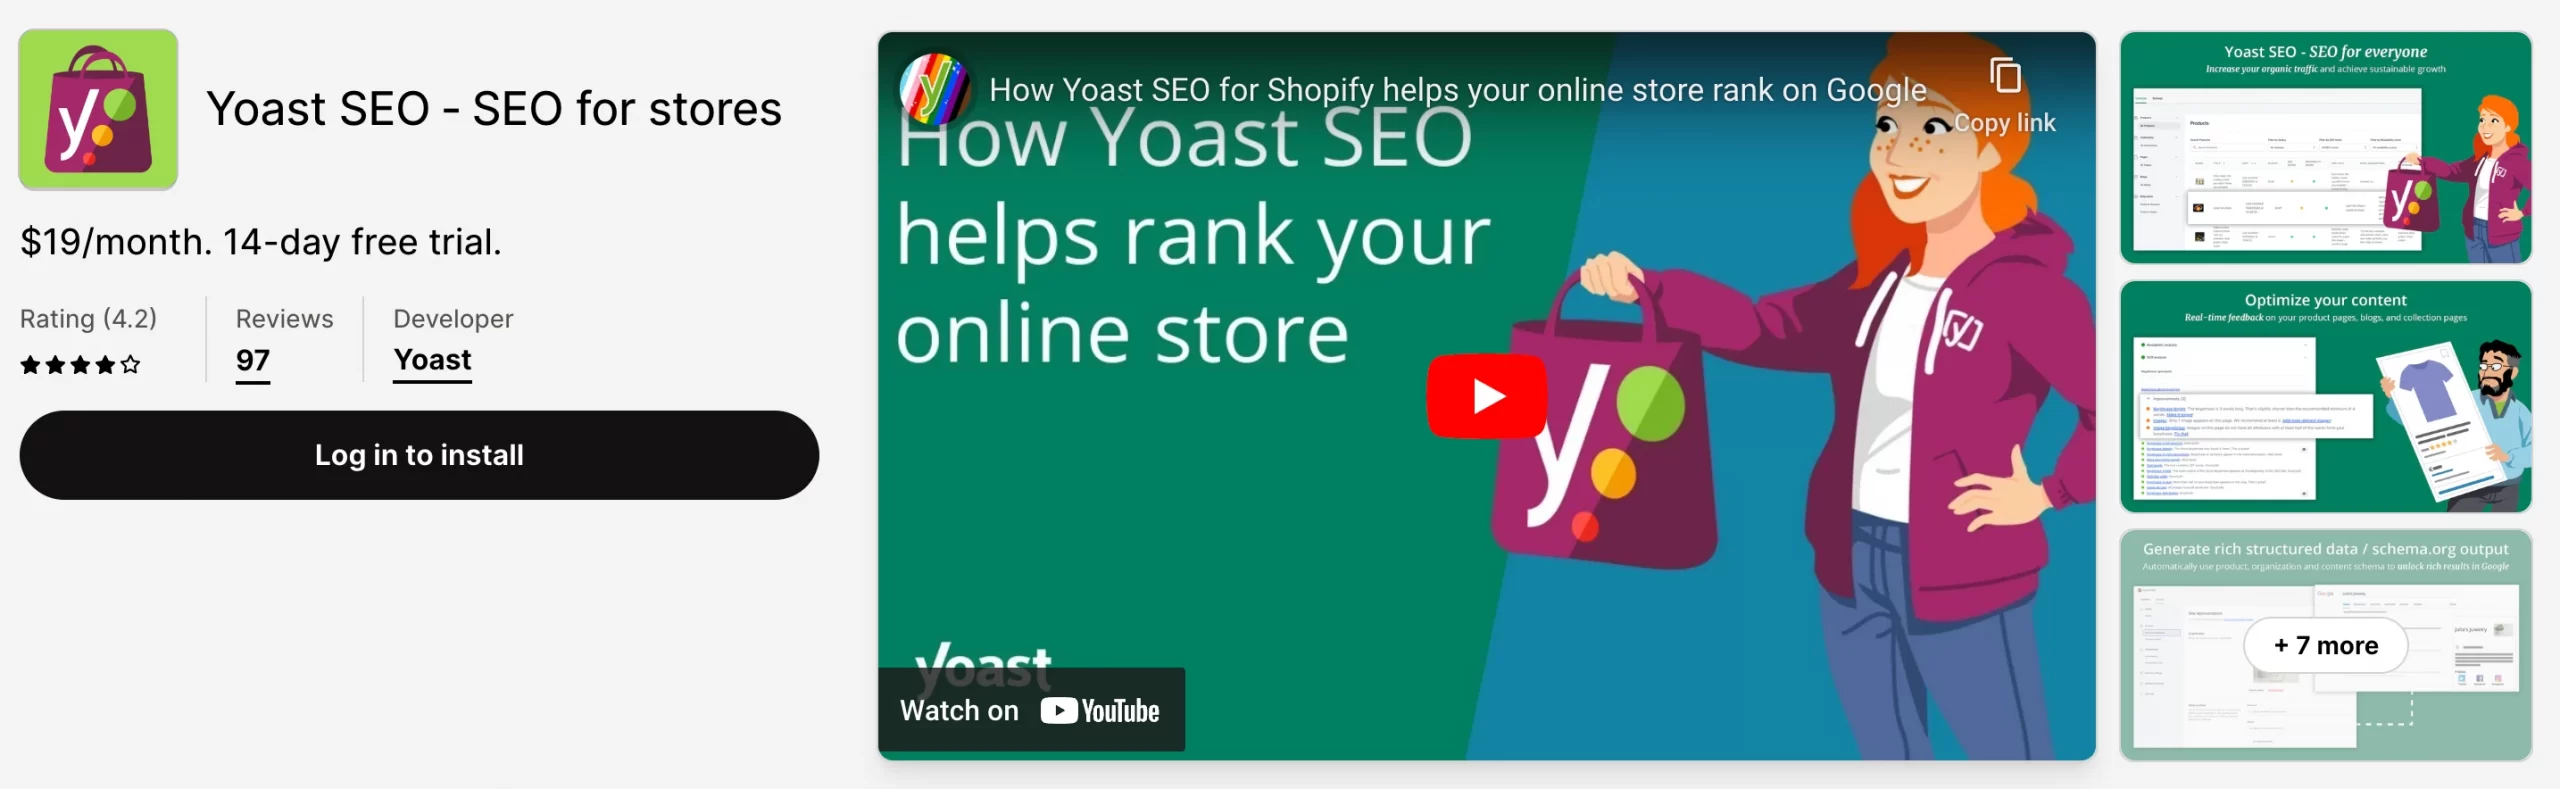 yoast seo for stores